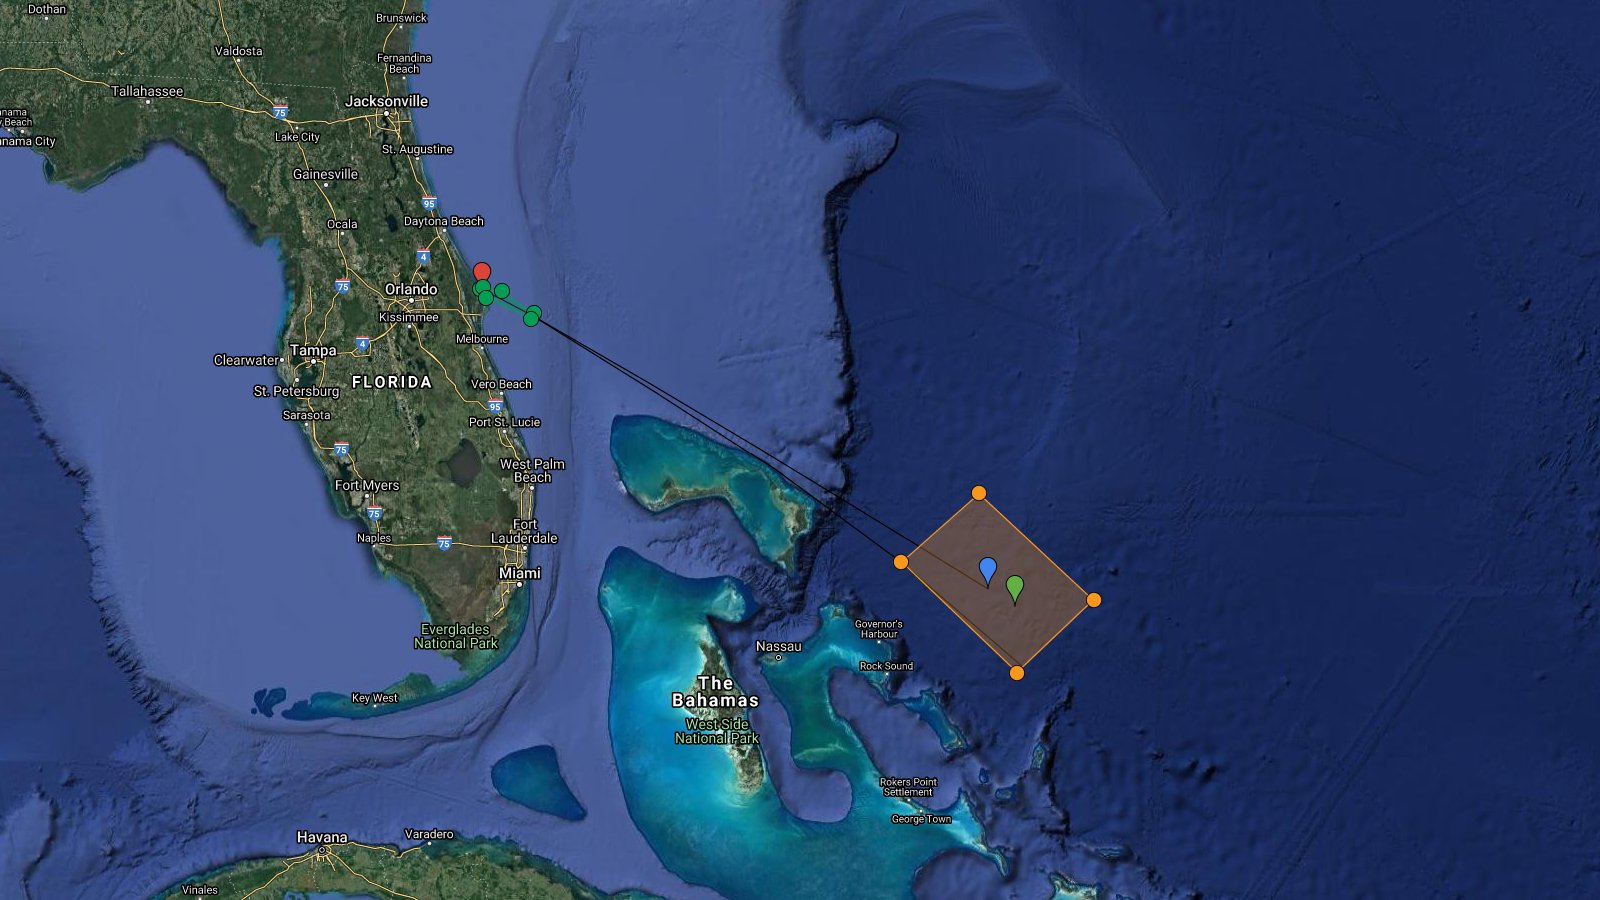 Zones closed during take-off and approximate trajectory for the Starlink Group 4-5 mission (Source: Raul / @ Raul74Cz)